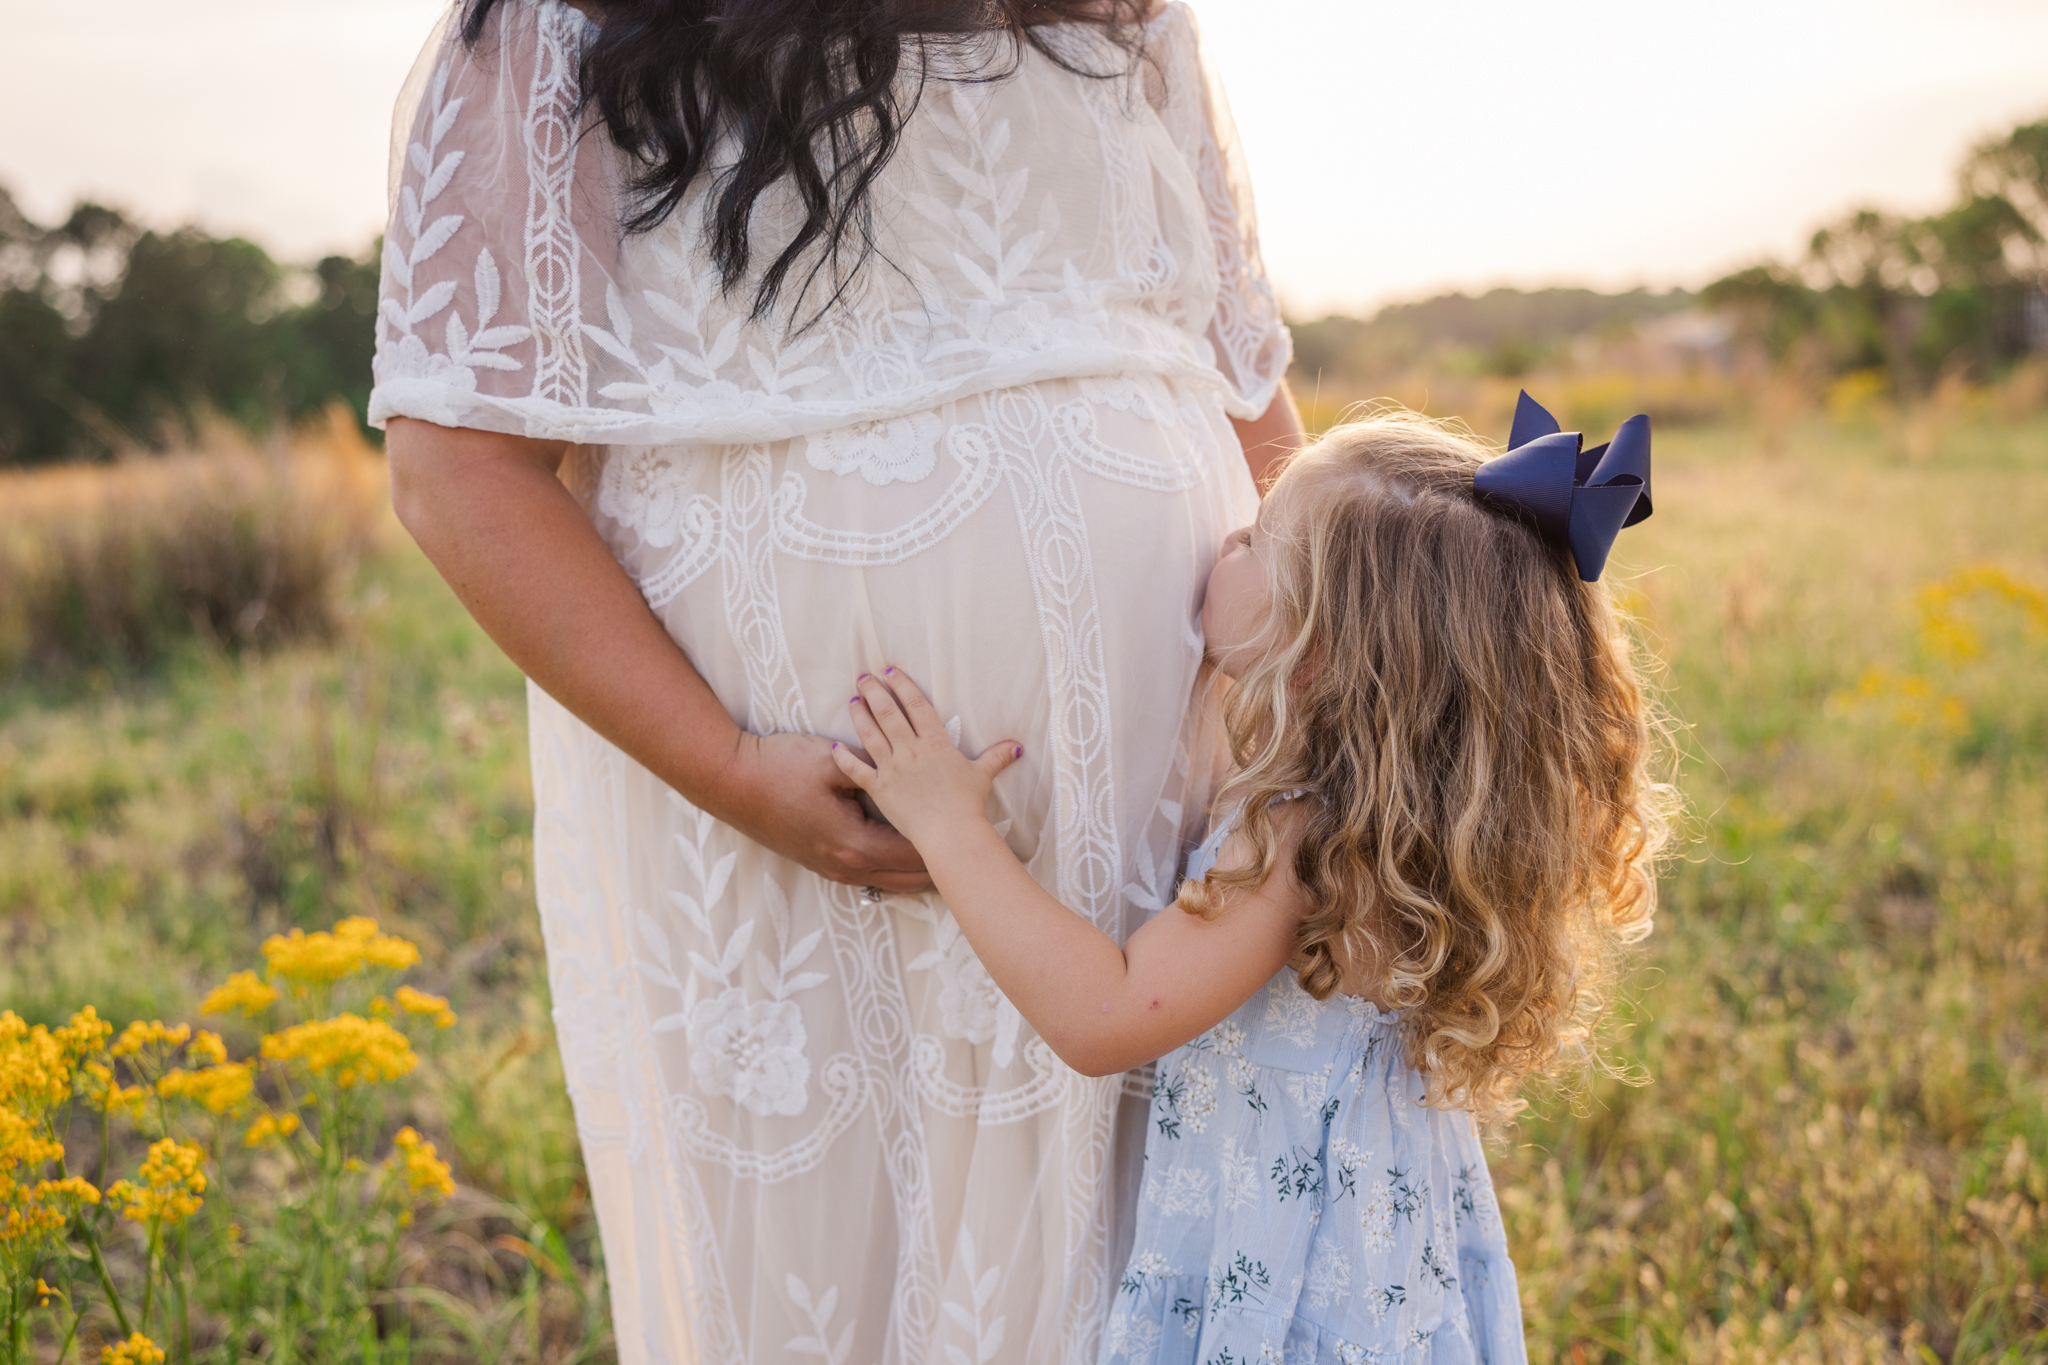 Expecting mom and daughter capturing a sweet moment during their maternity session.